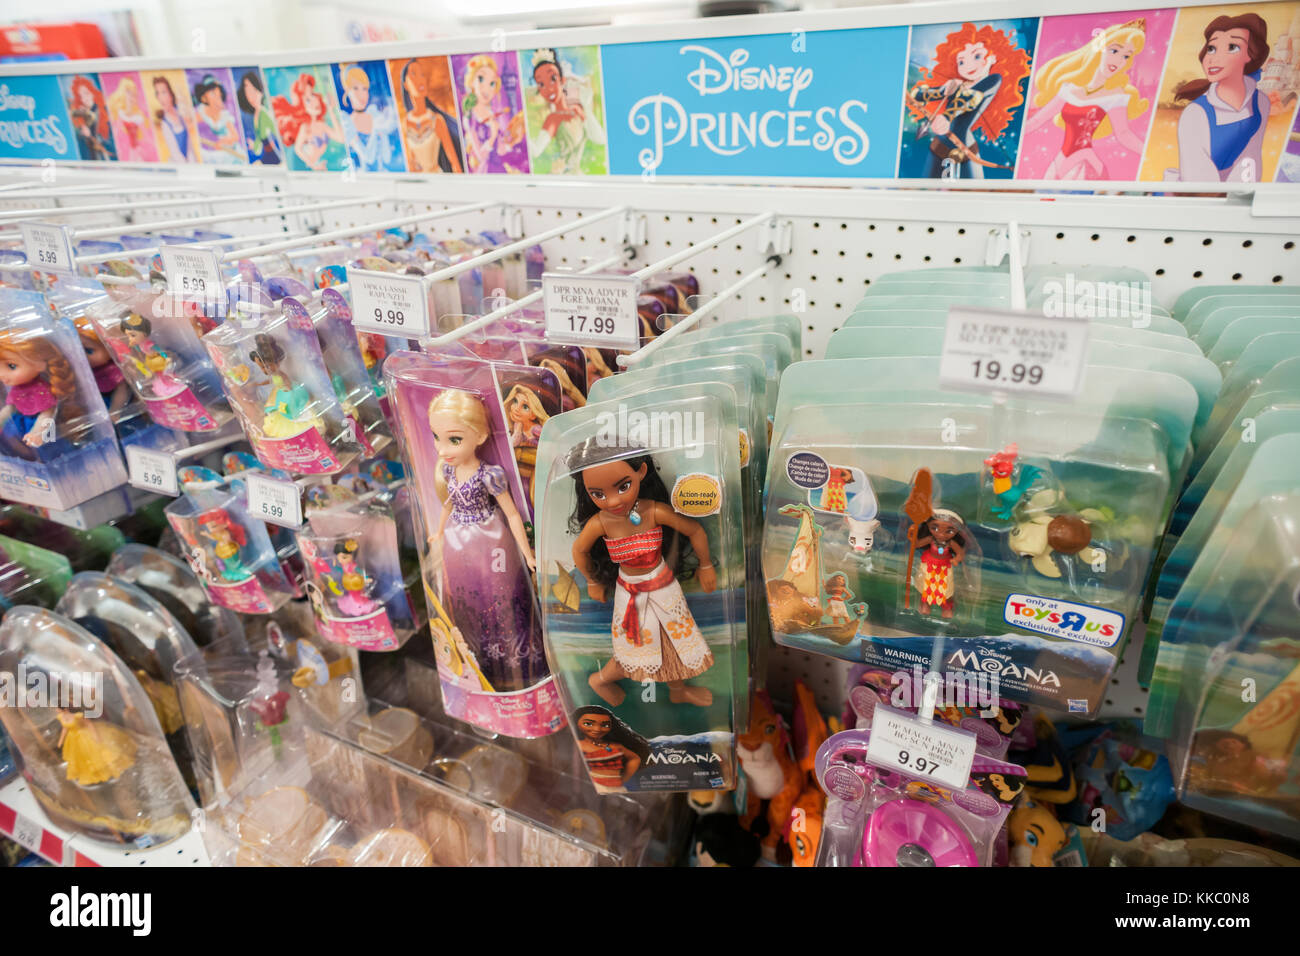 Disney Princess dolls in the Toys R Us location in Times Square in New York on Sunday, November 26, 2017. The temporary location is a return to the area after closing their former store in 2015 and will remain open at least until the holidays. (© Richard B. Levine) Stock Photo